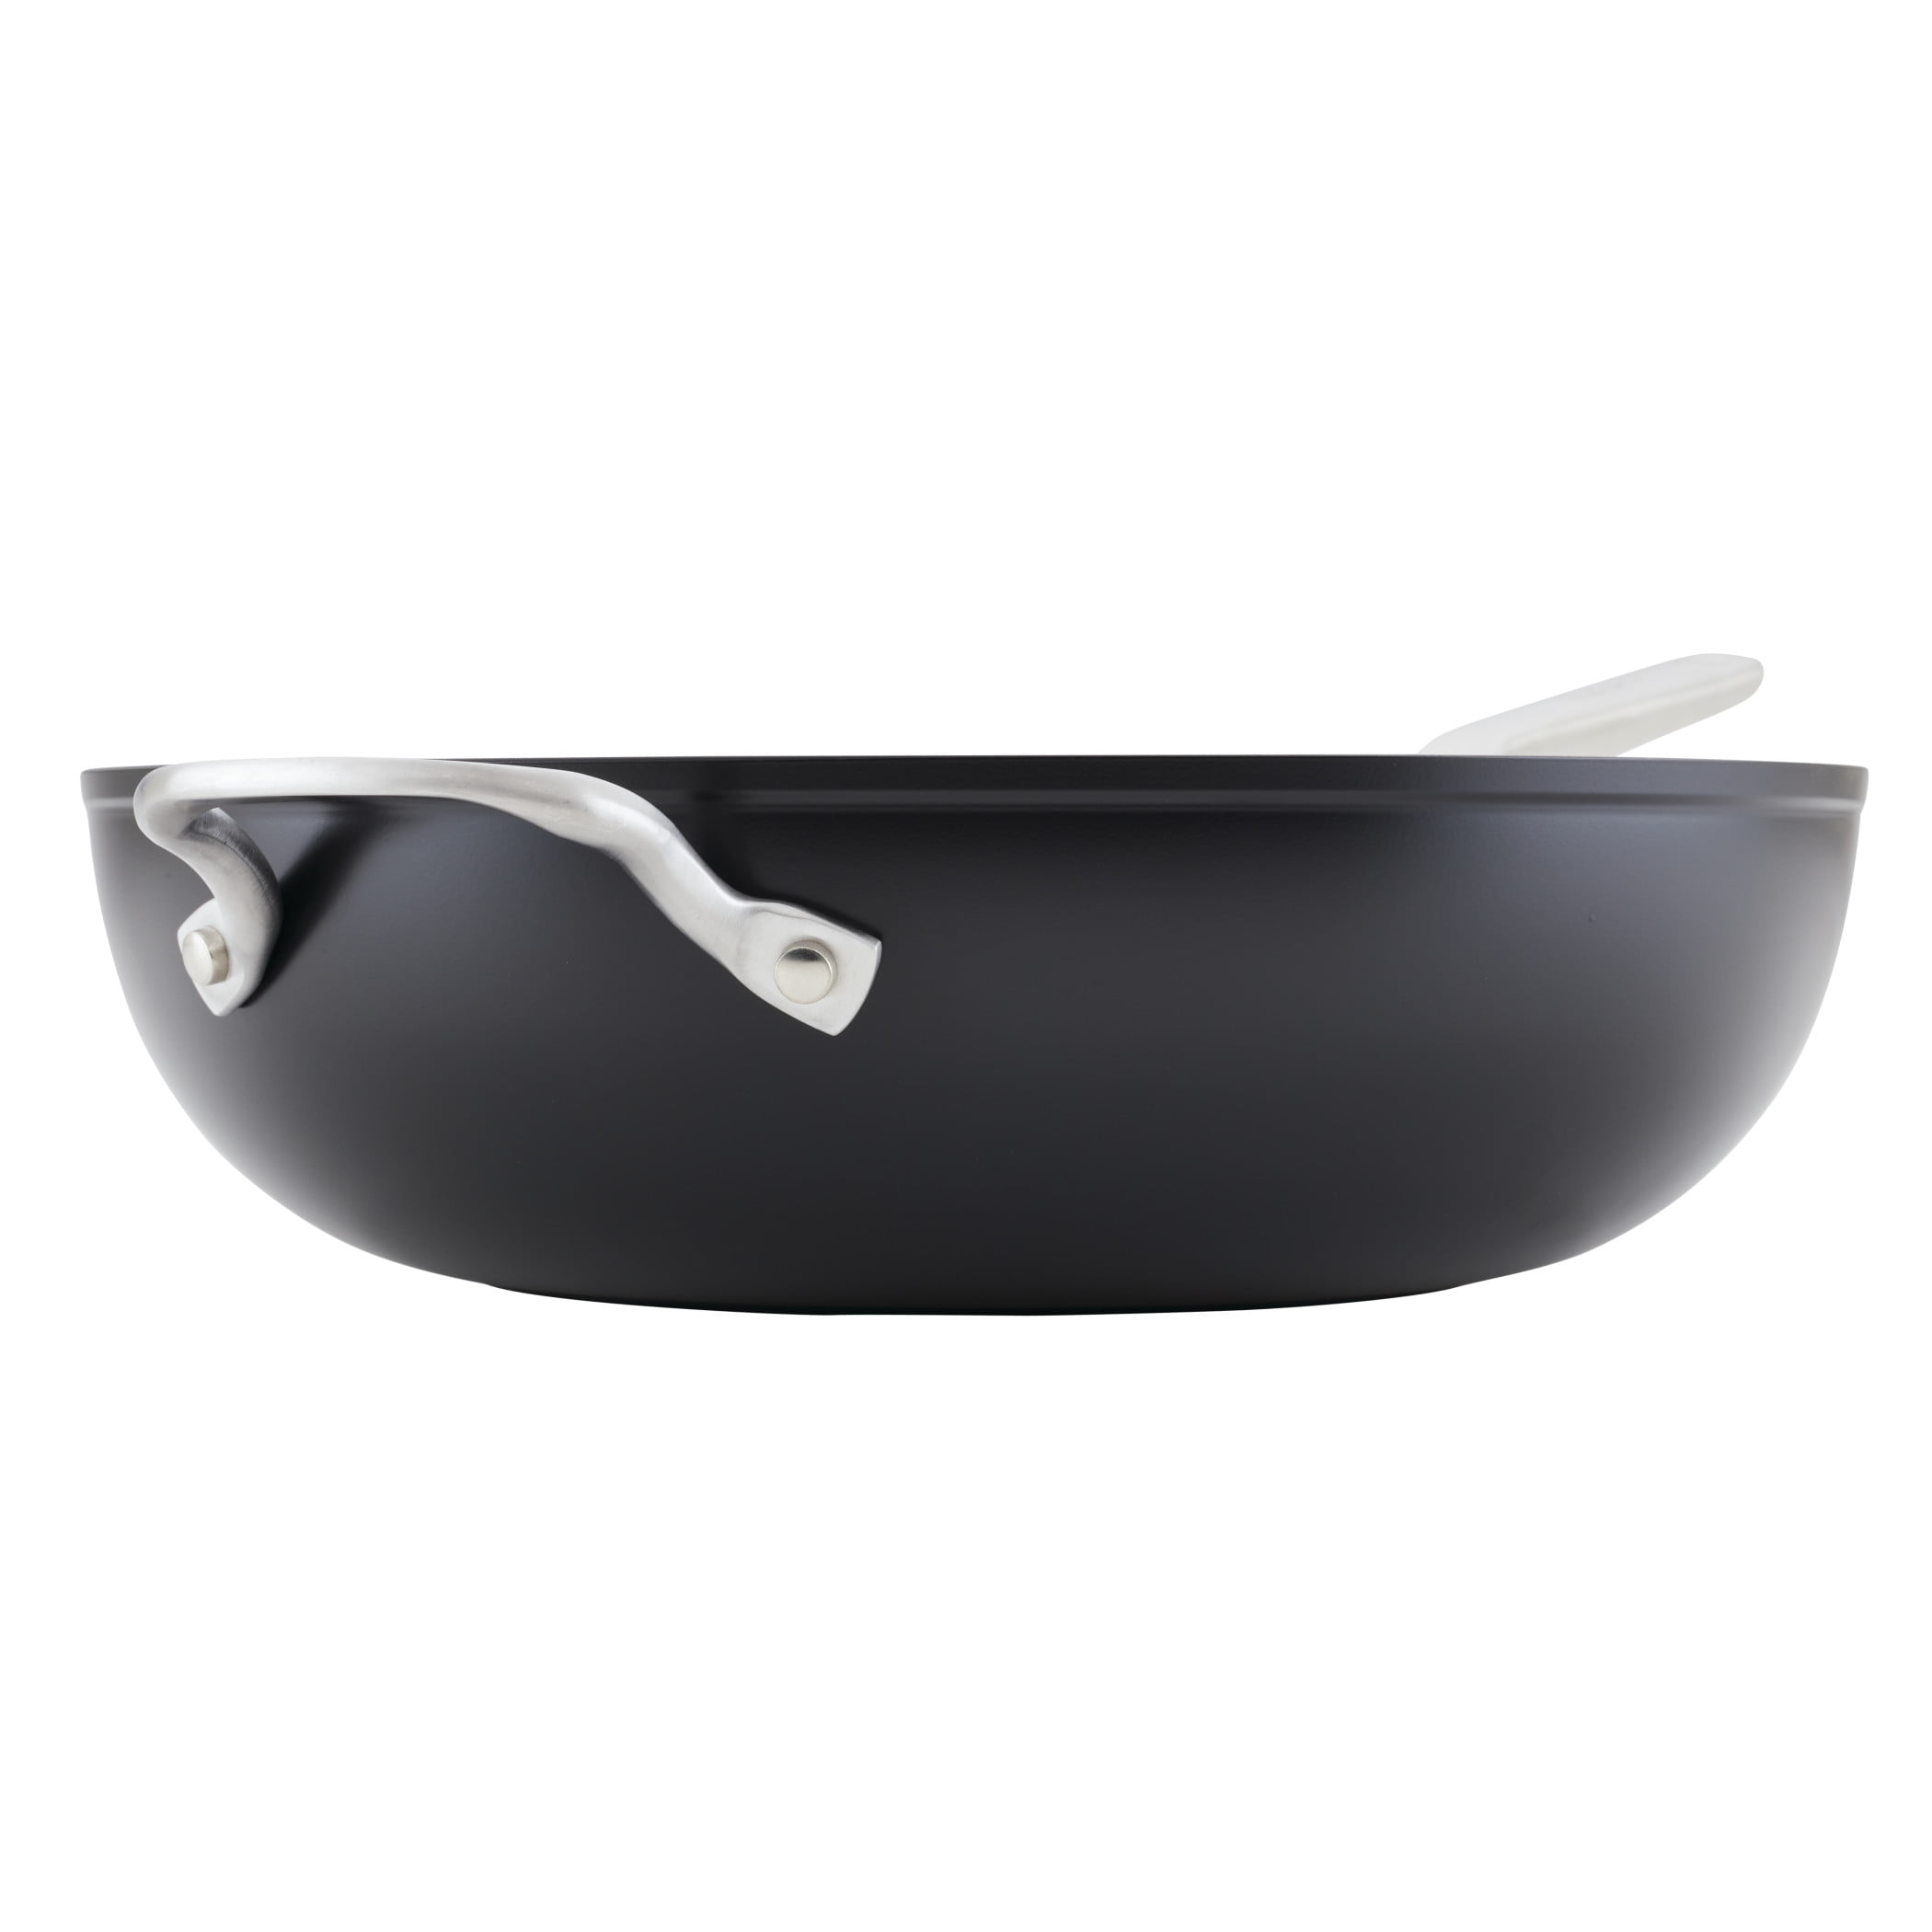 Meyer Accent Series 12.75 Hard Anodized Nonstick Induction Stir Fry Wok with Helper Handle and Glass Lid Matte Black